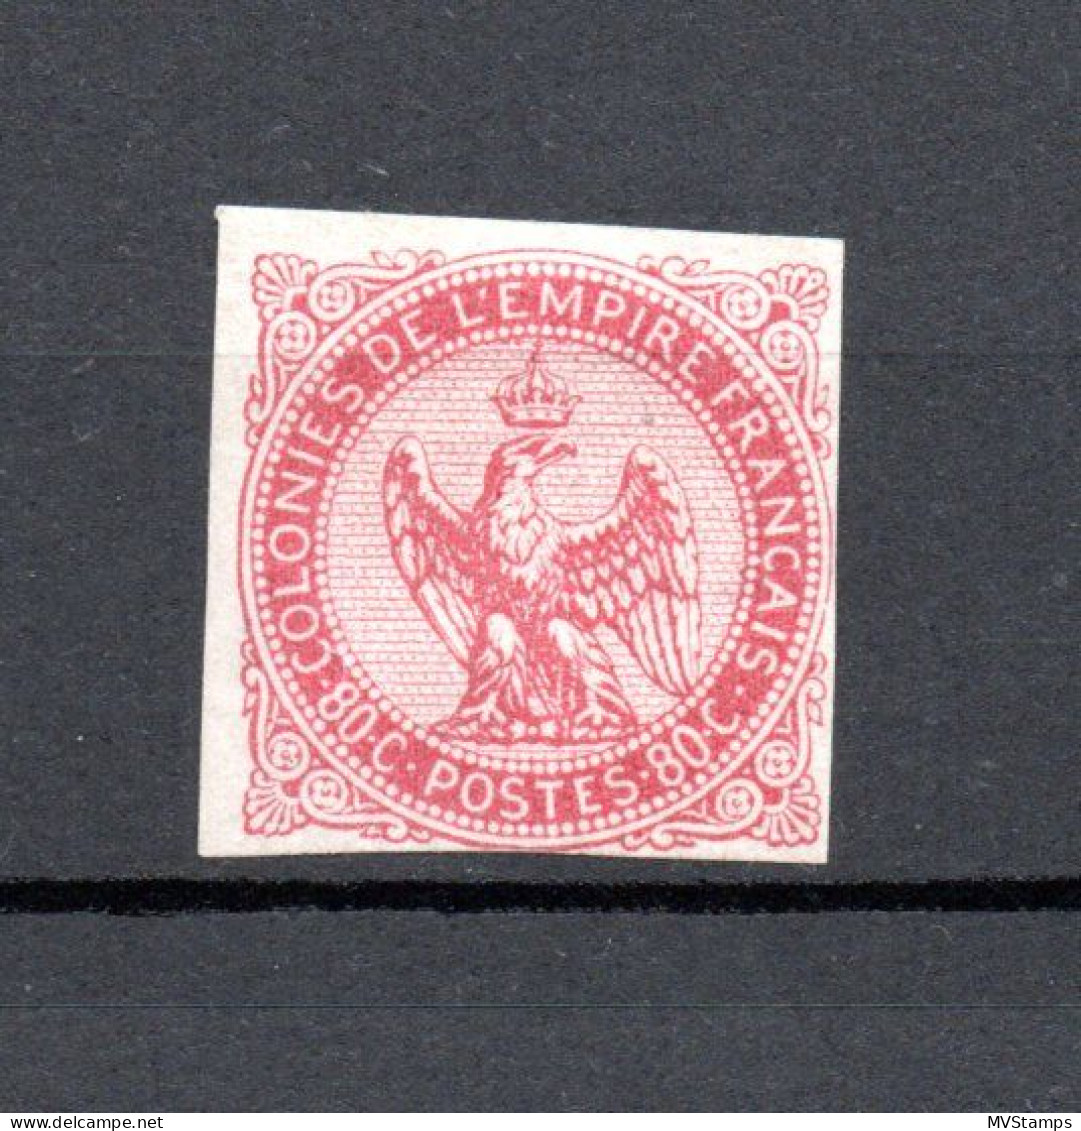 France Colonies 1865 Old Eagle Stamp (Michel 6) Nice Unused/no Gum - Aquila Imperiale